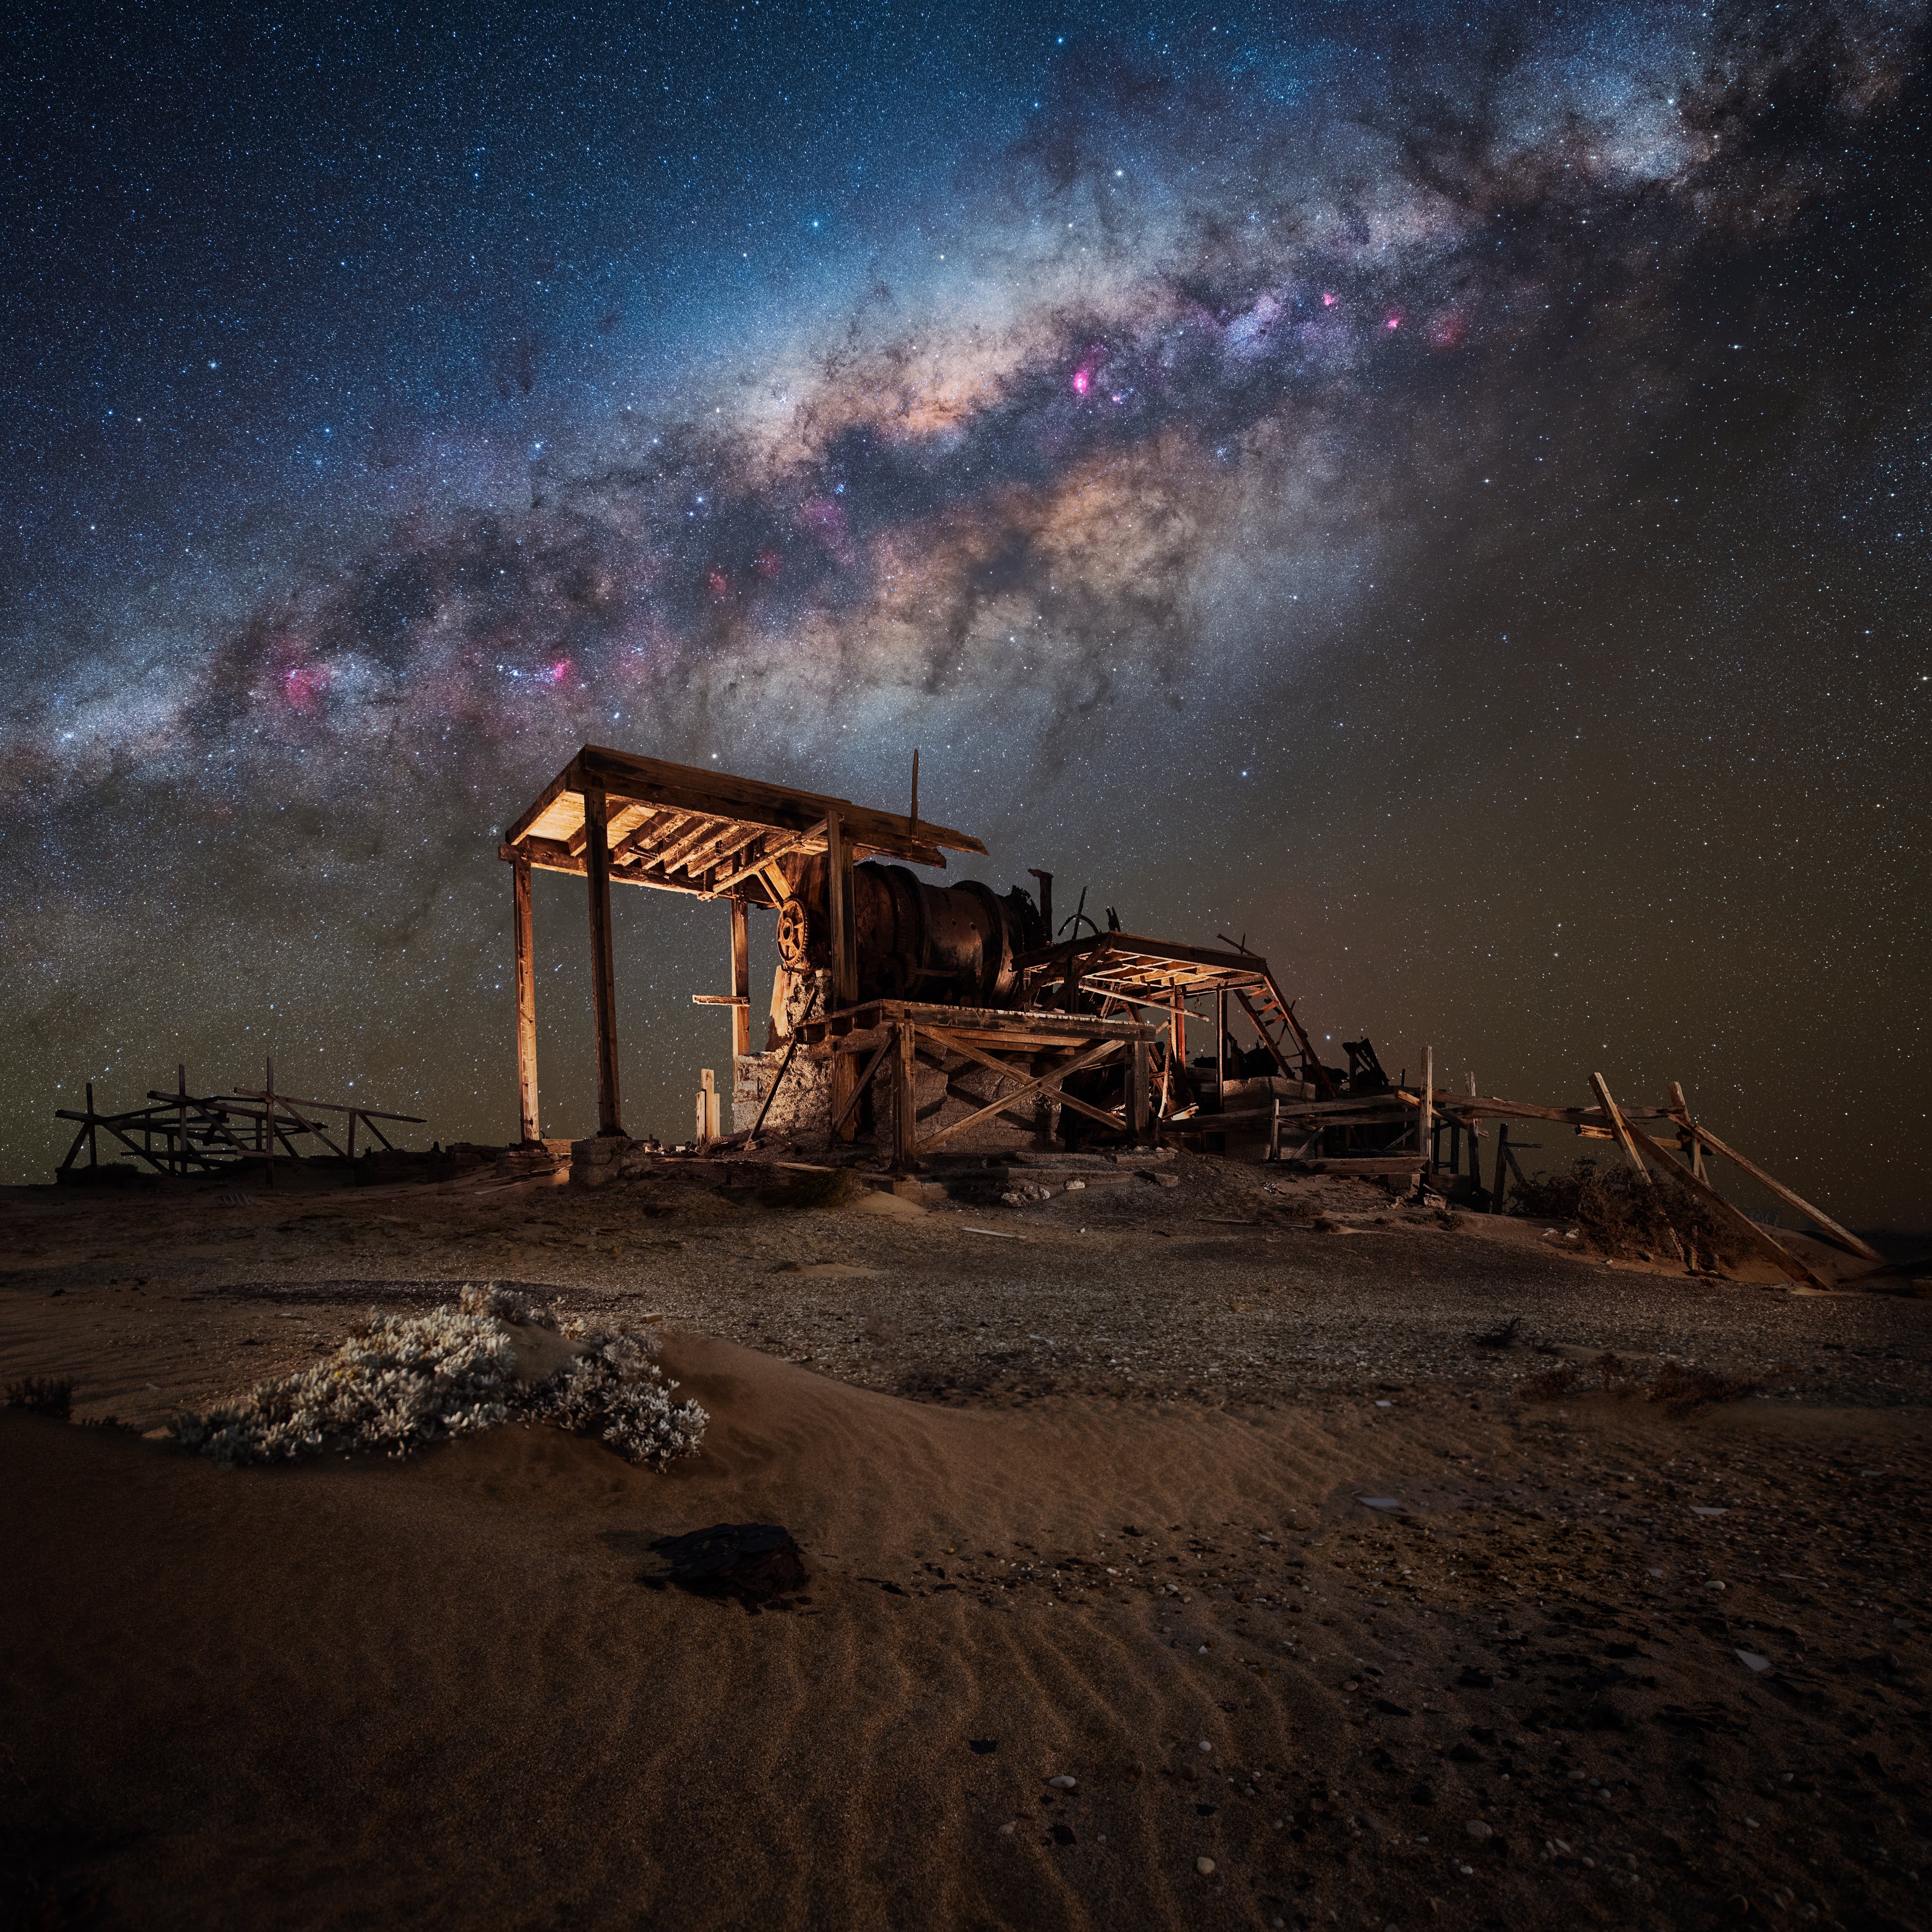 The Milky Way over an abandoned processing planet in Namibia. (Photo: Vikas Chander)